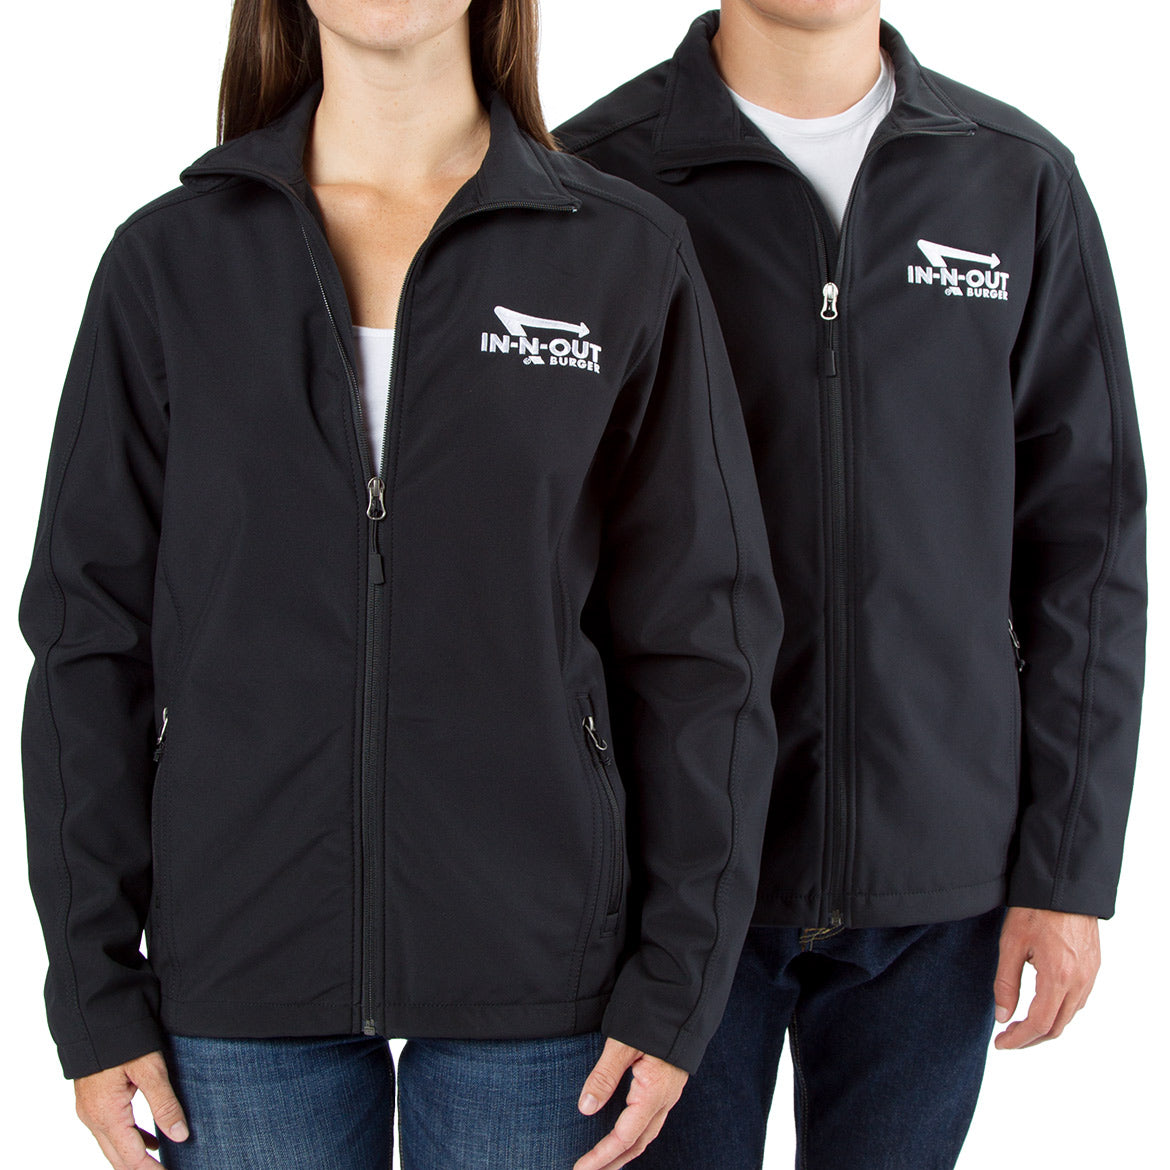 SOFT SHELL JACKET – In-N-Out Burger Company Store